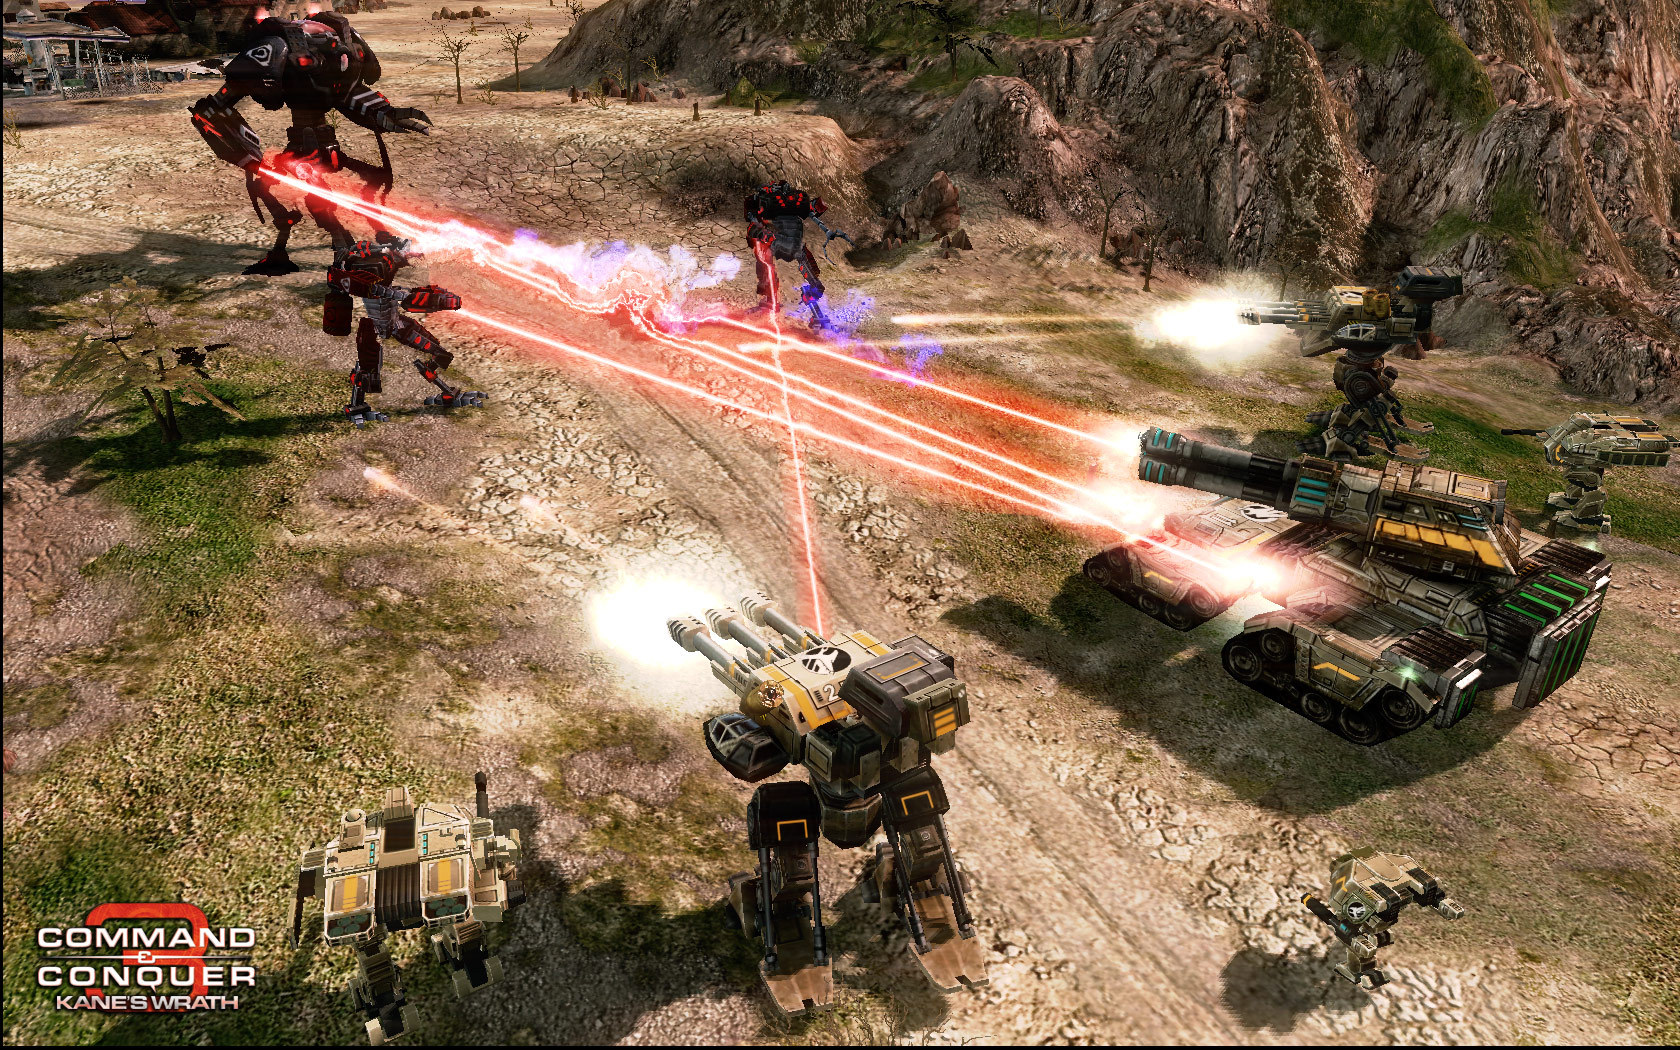 command-conquer-3-kane-s-wrath-on-steam